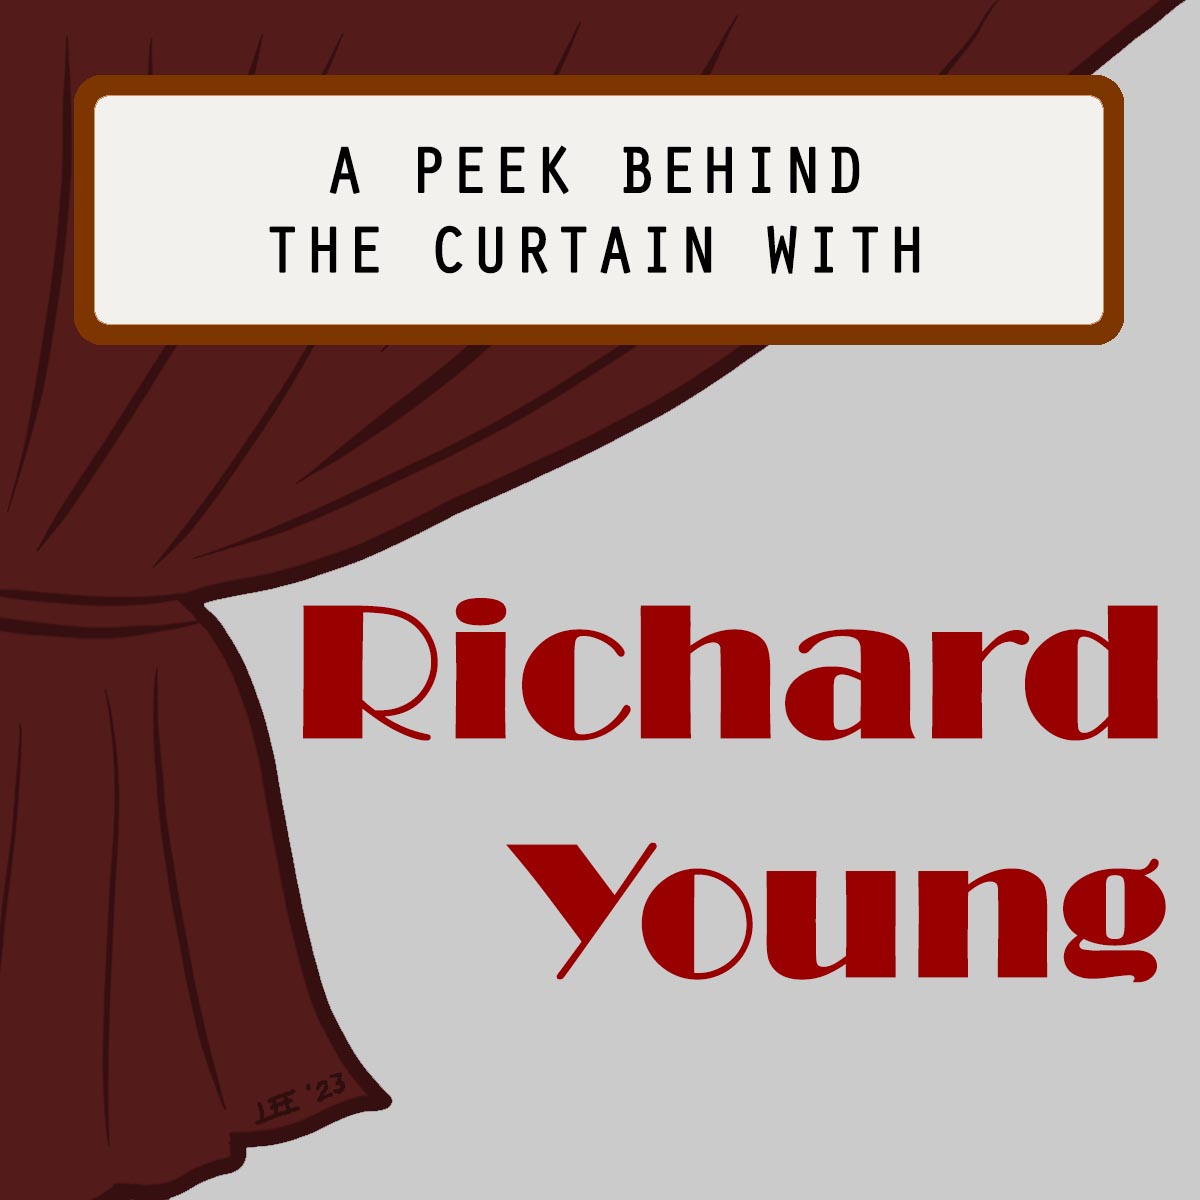 A peek behind the curtain with Richard Young